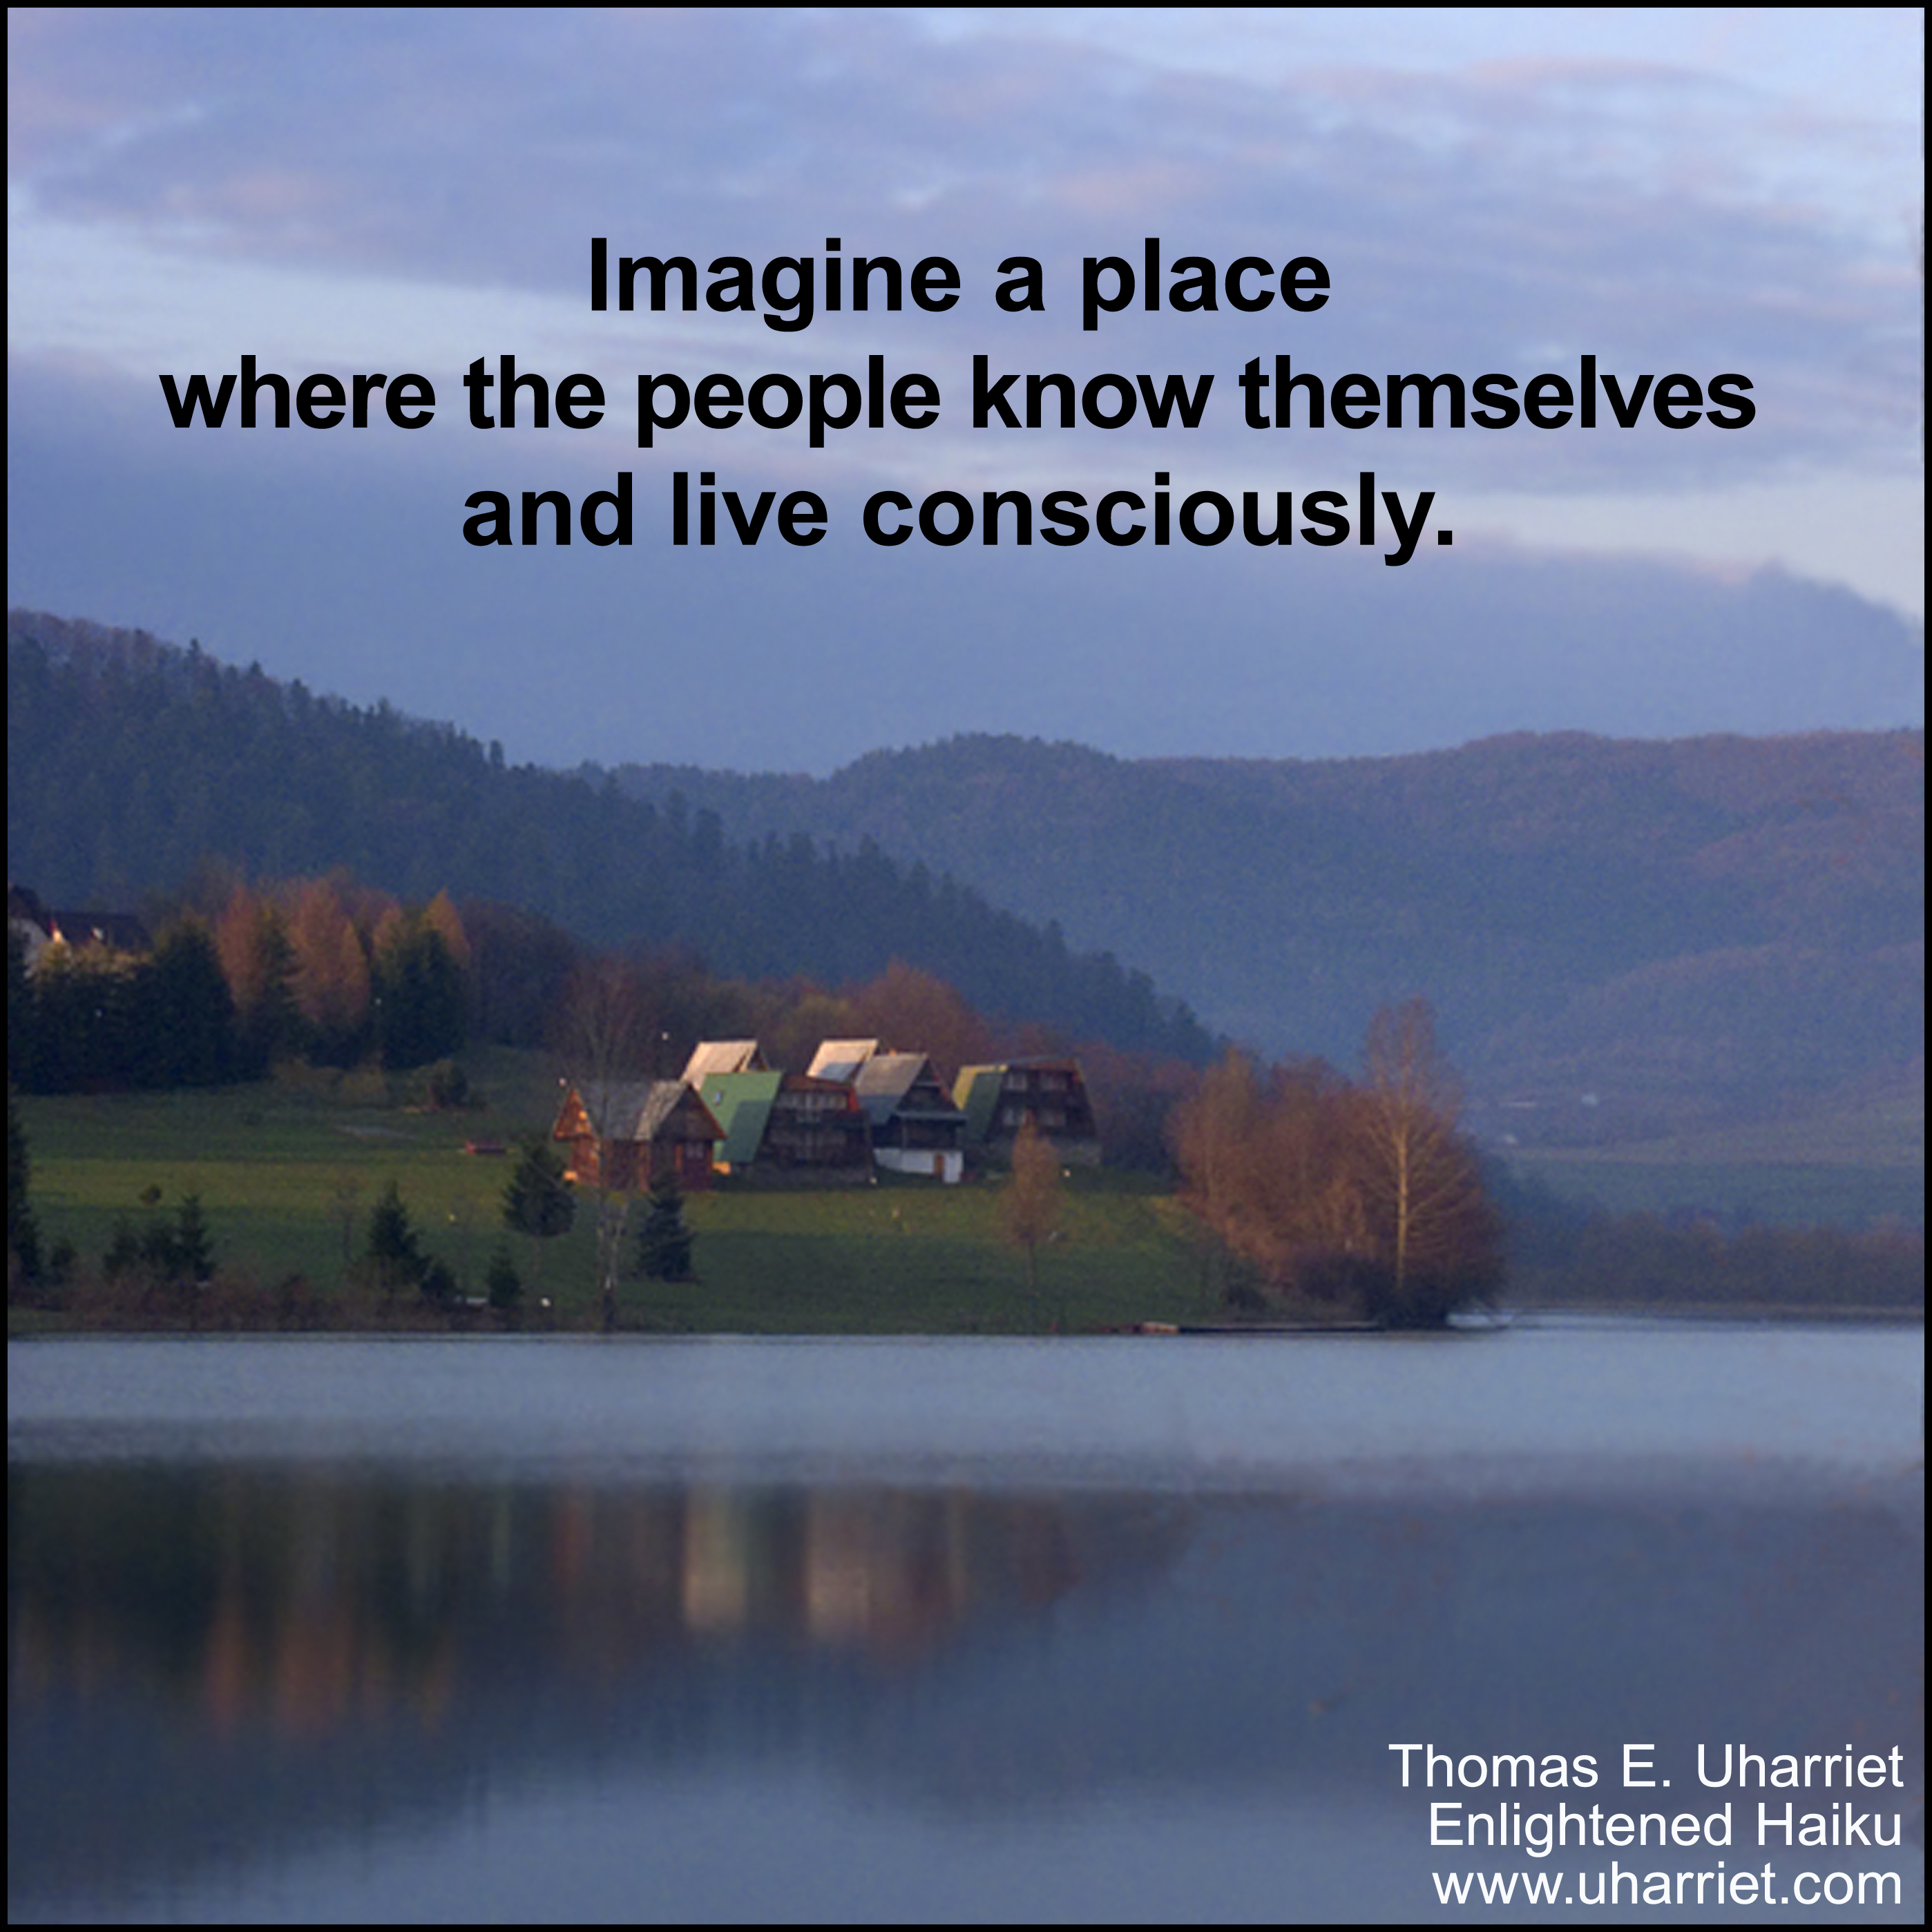 Imagine a place where people know themselves.